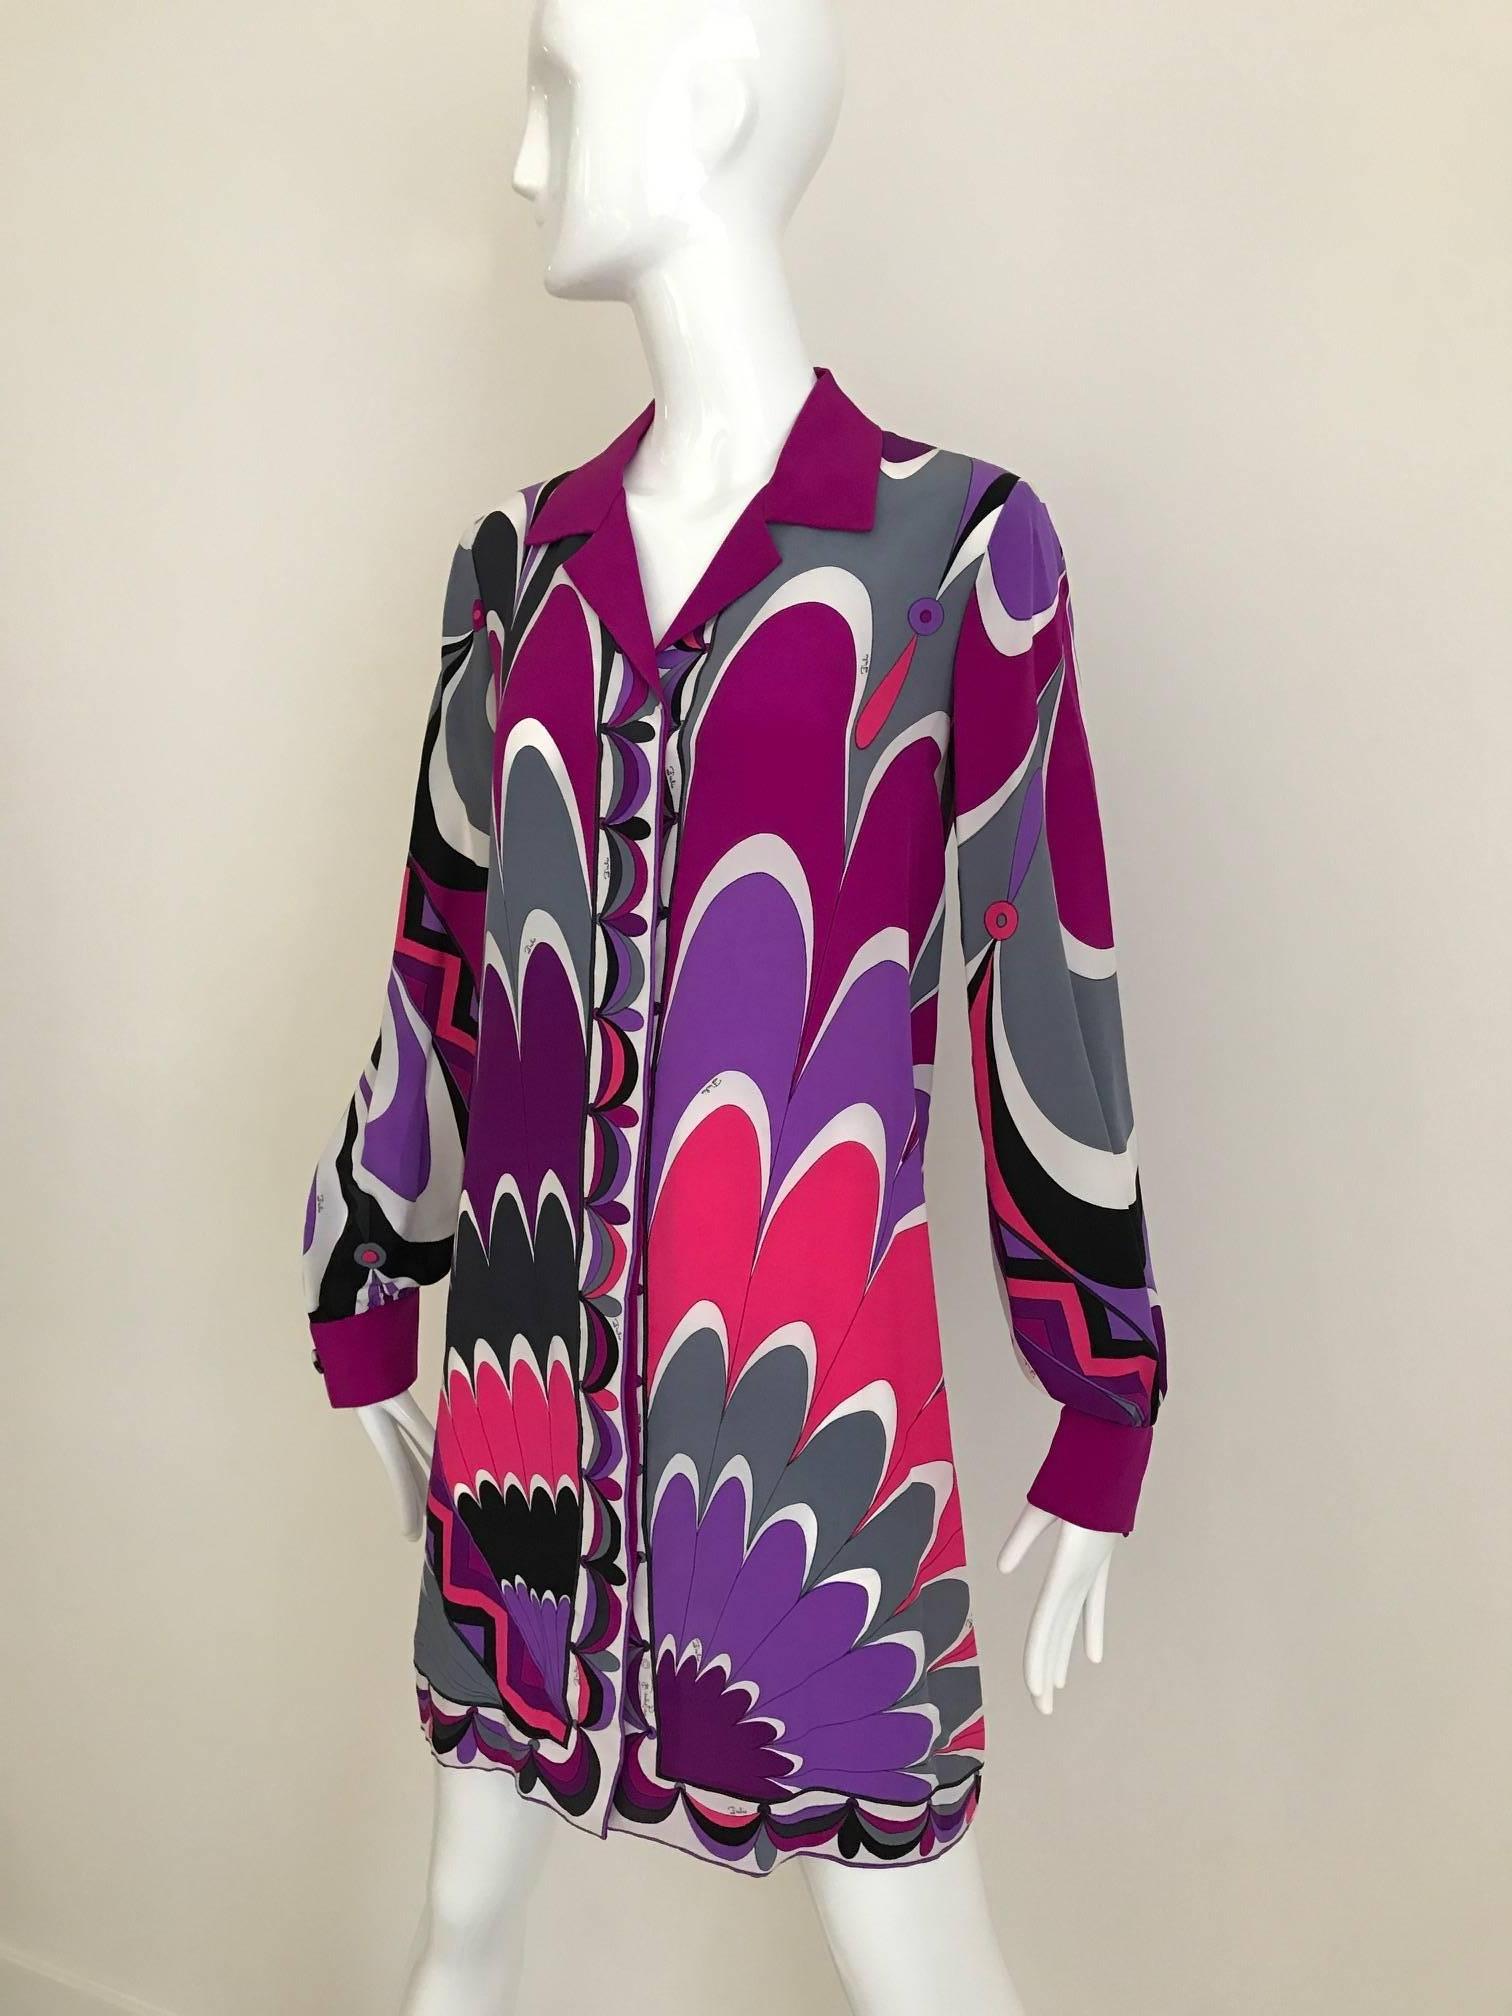 Vintage 1970s Emilio Pucci Silk Long Sleeve Mini Tunic Dress in Vibrant fuschia, purple , black and grey print. This Silk Tunic can be worn as Long Shirt or perfect for beach cover up!  This Tunic / Silk shirt in excellent condition. 
Fit Modern